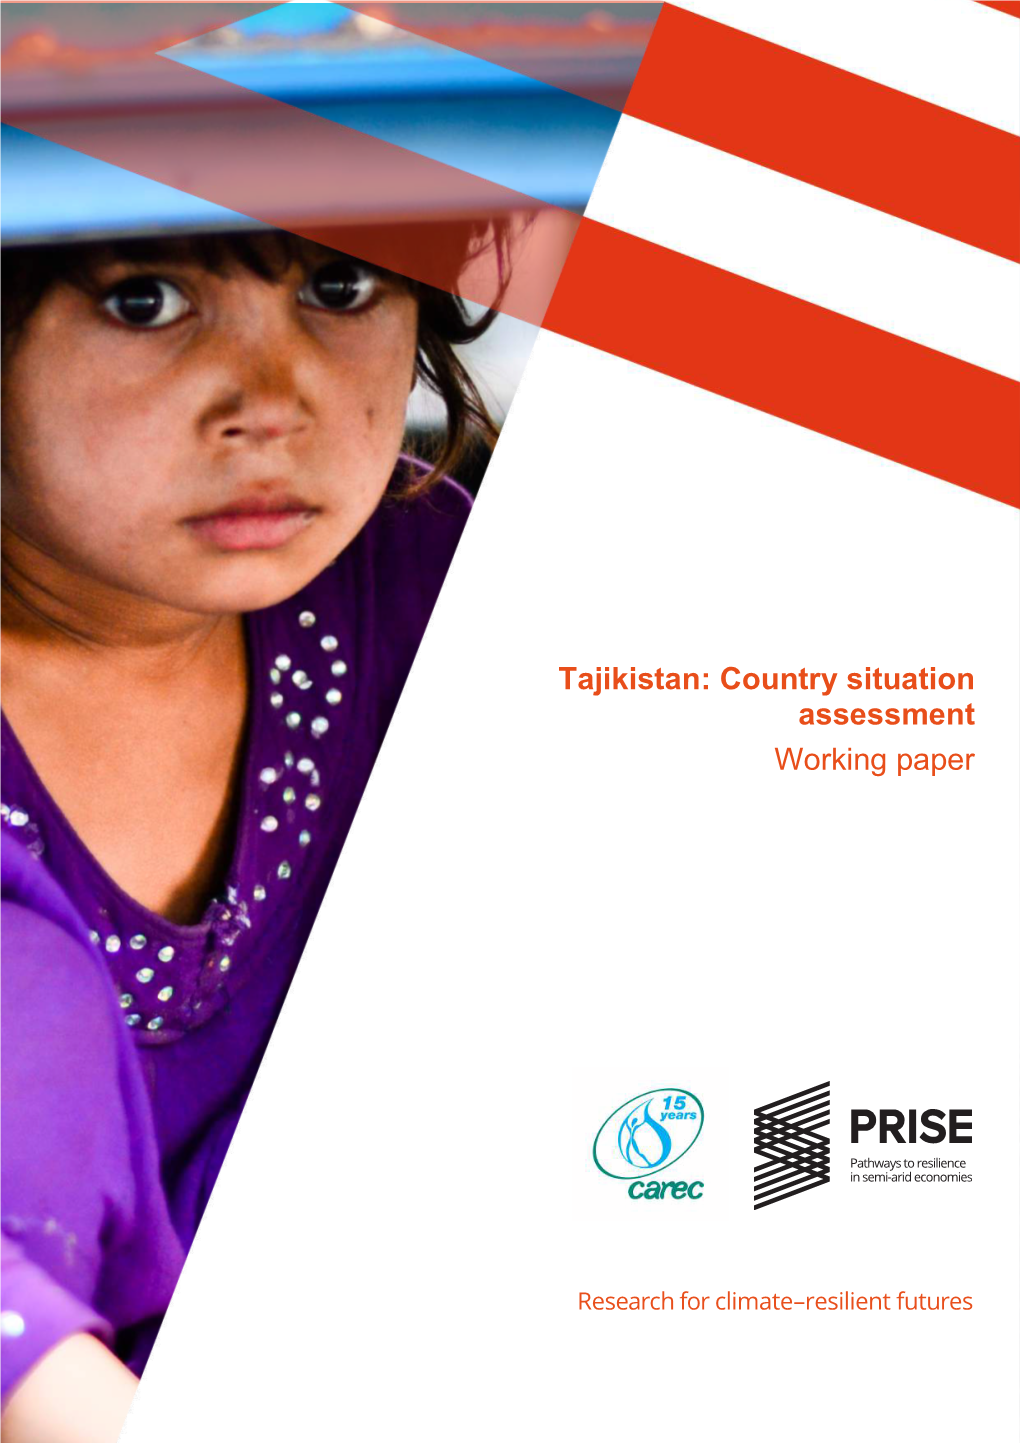 Tajikistan: Country Situation Assessment Working Paper